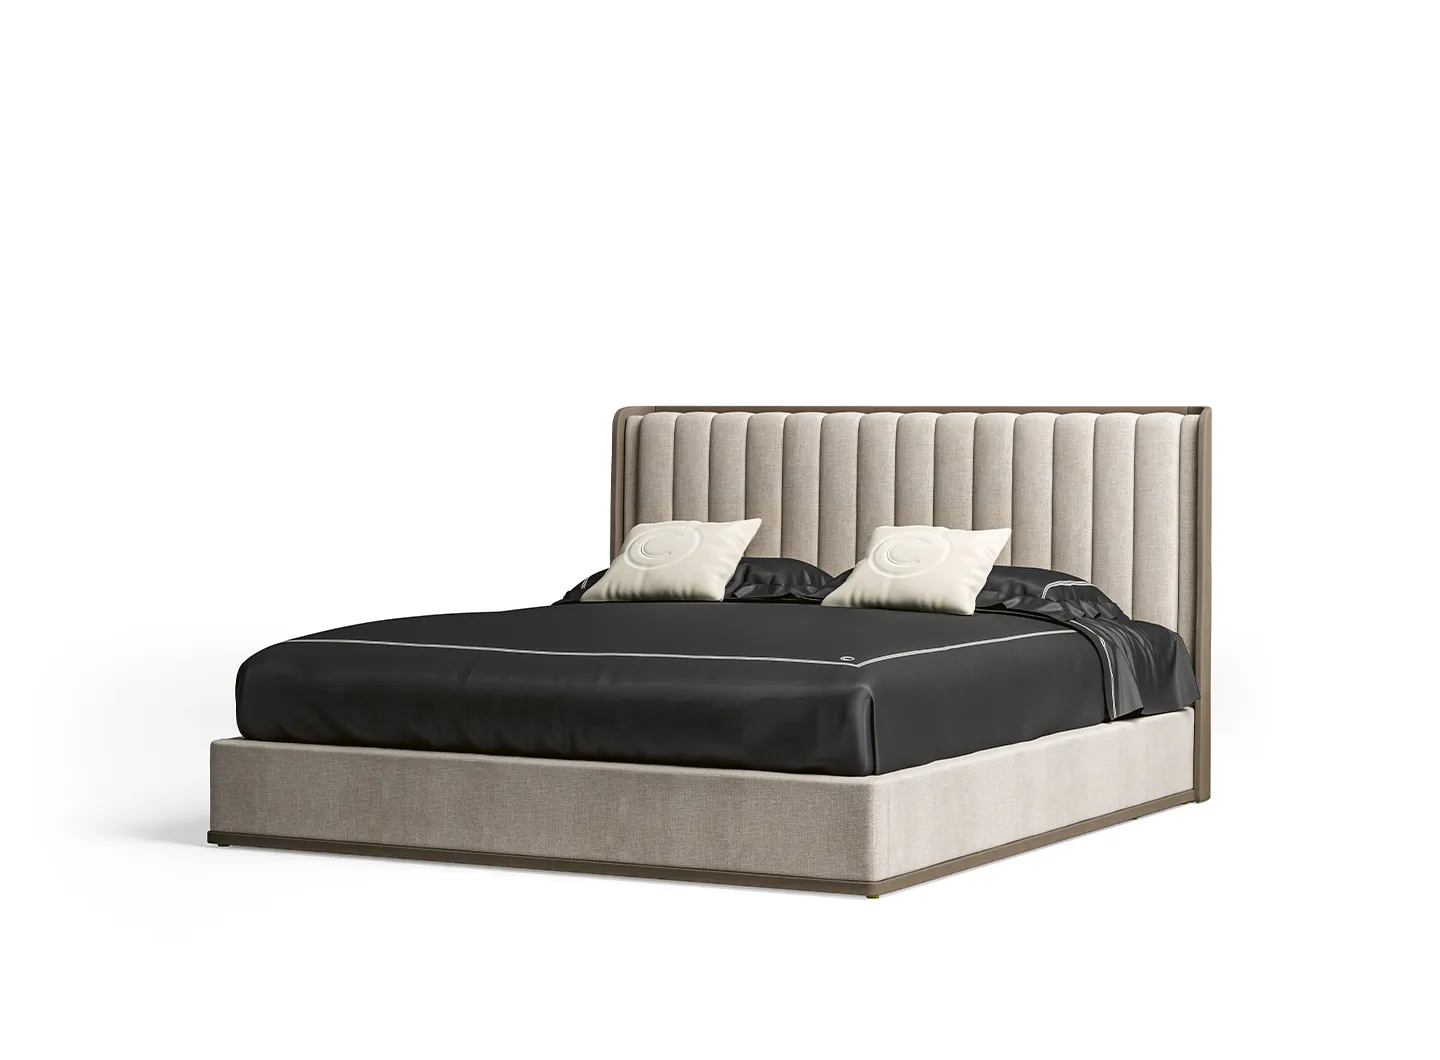 CPRN Homood-Bed with storage box